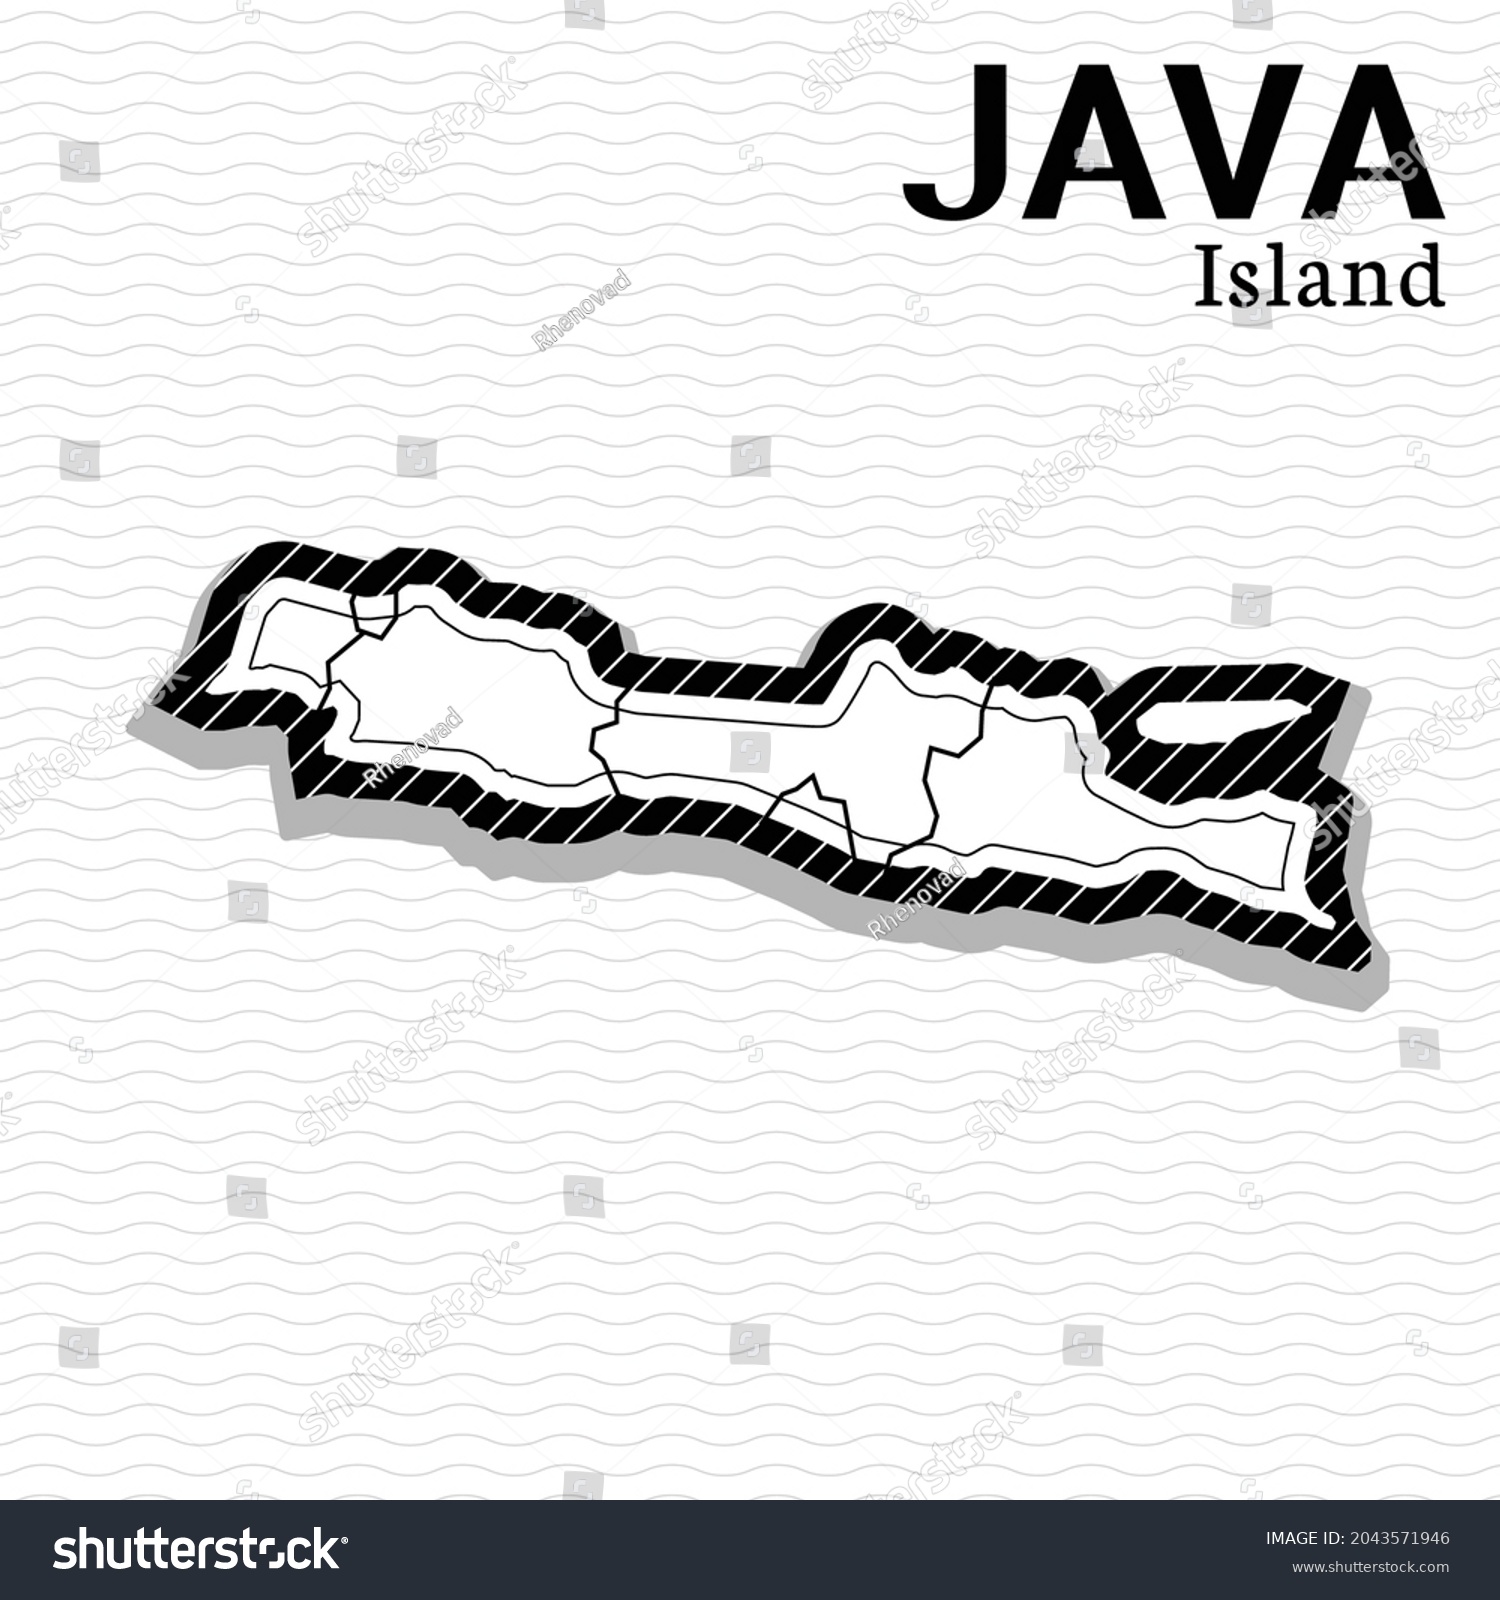 SVG of Post template for social media Java Island vector map black and white. High detailed illustration. Java Island, part of Indonesia, is a country in Asia. svg